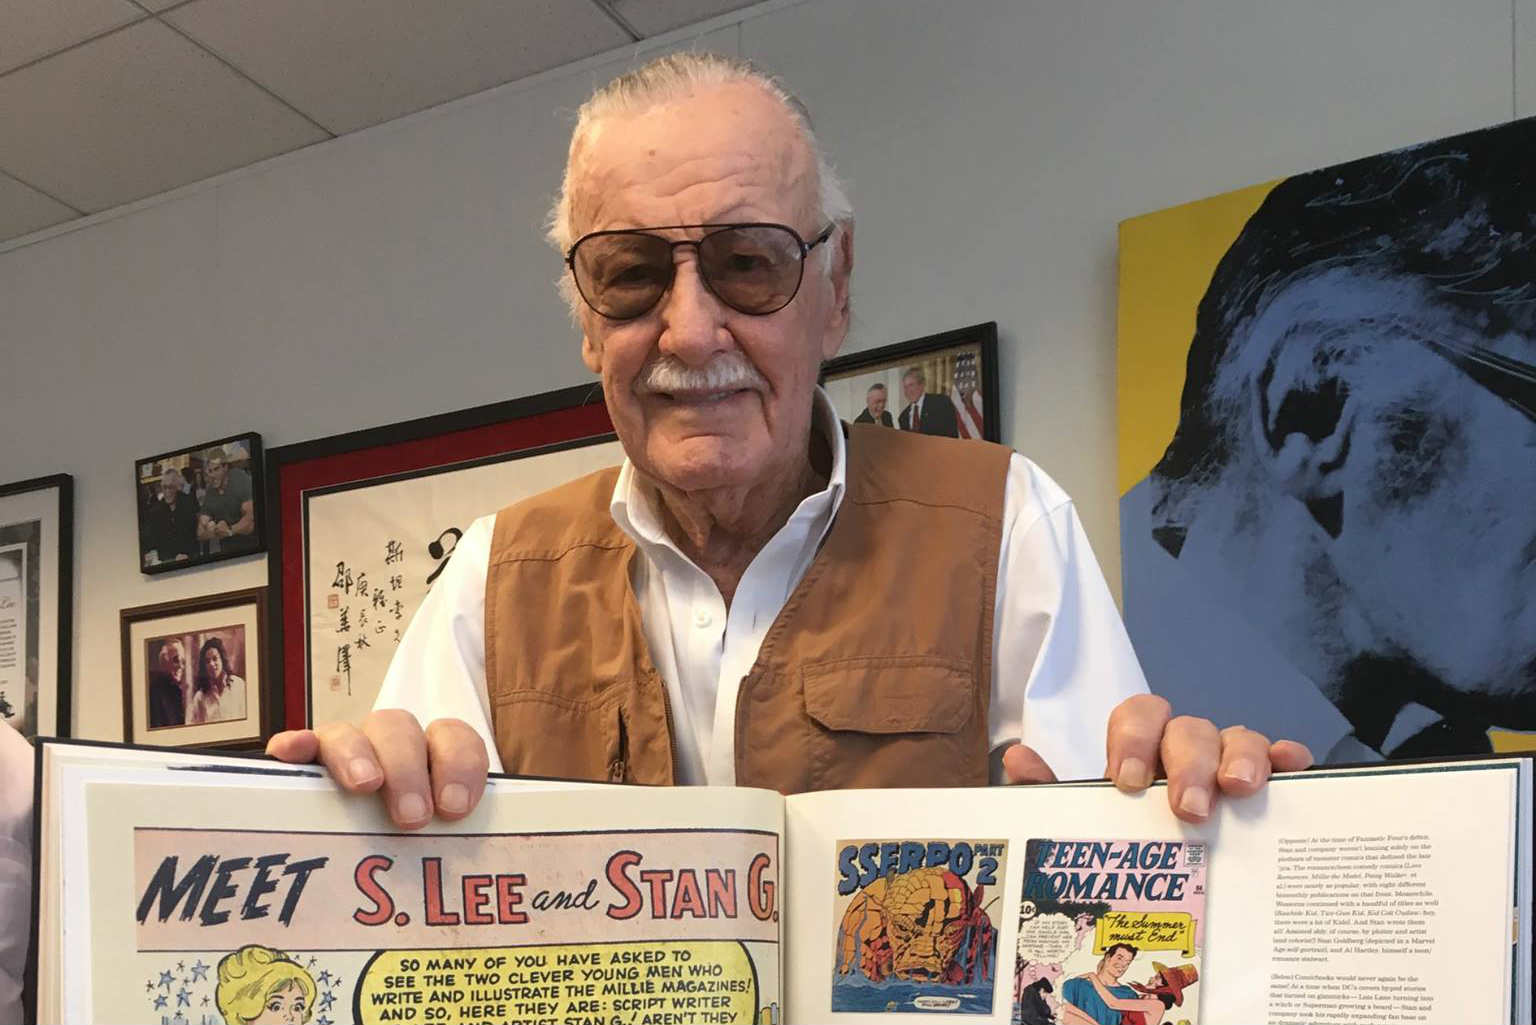 GOODBYE TO A LEGEND. Hollywood stars pay tribute to Marvel Comics legend Stan Lee. Image from Stan Lee's Facebook 